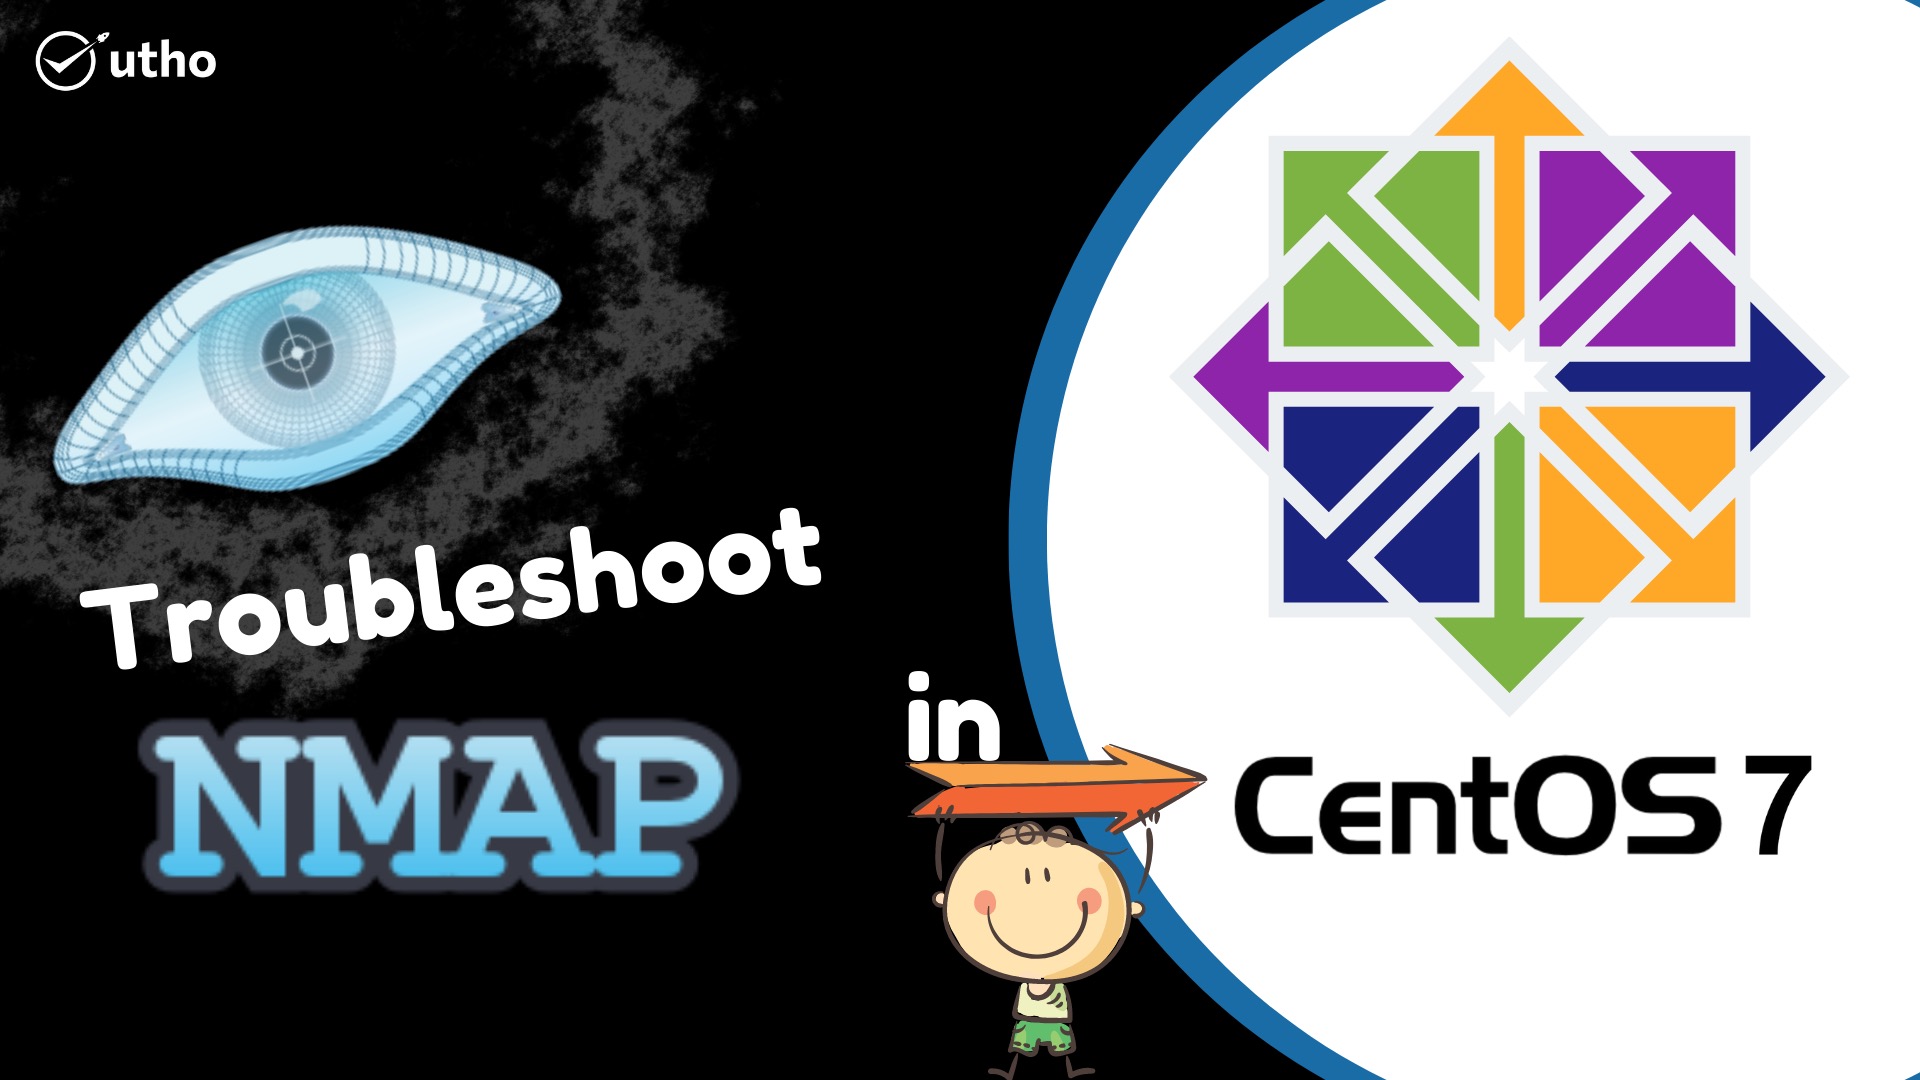 How to Troubleshoot with nmap in centos